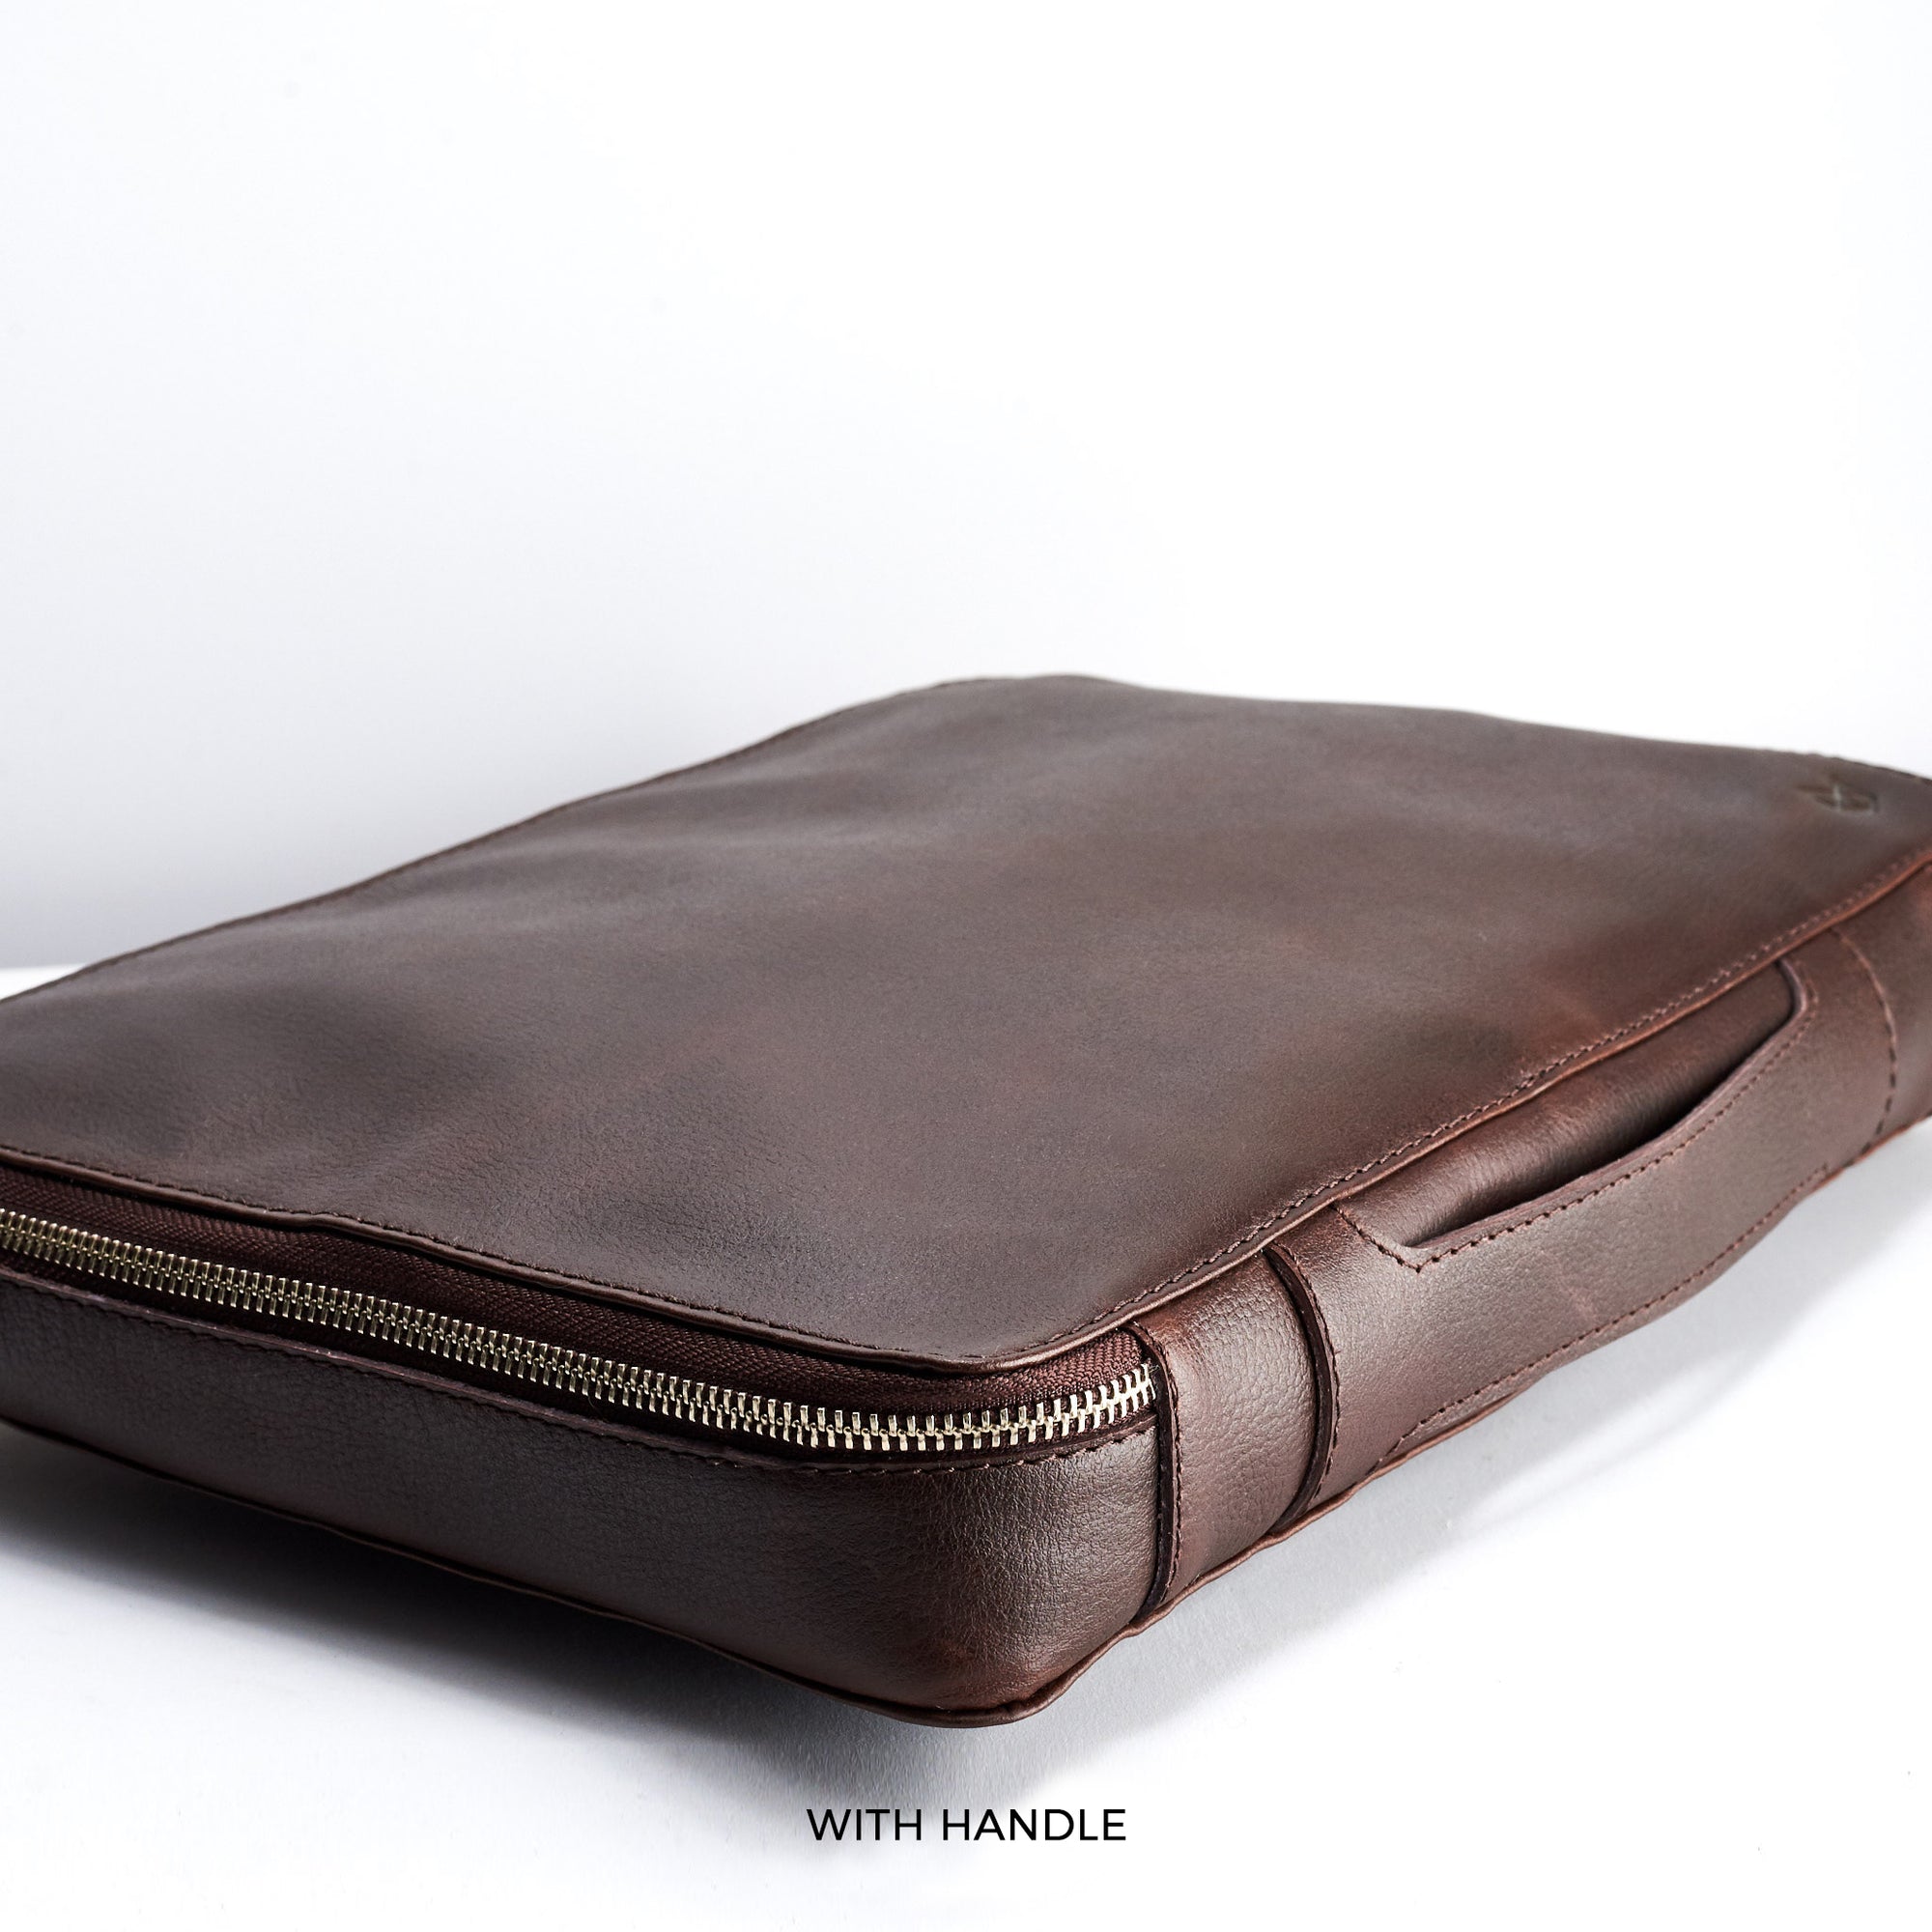  Custom handle. Dark brown leather organizer. Best tech bag for travel by Capra Leather